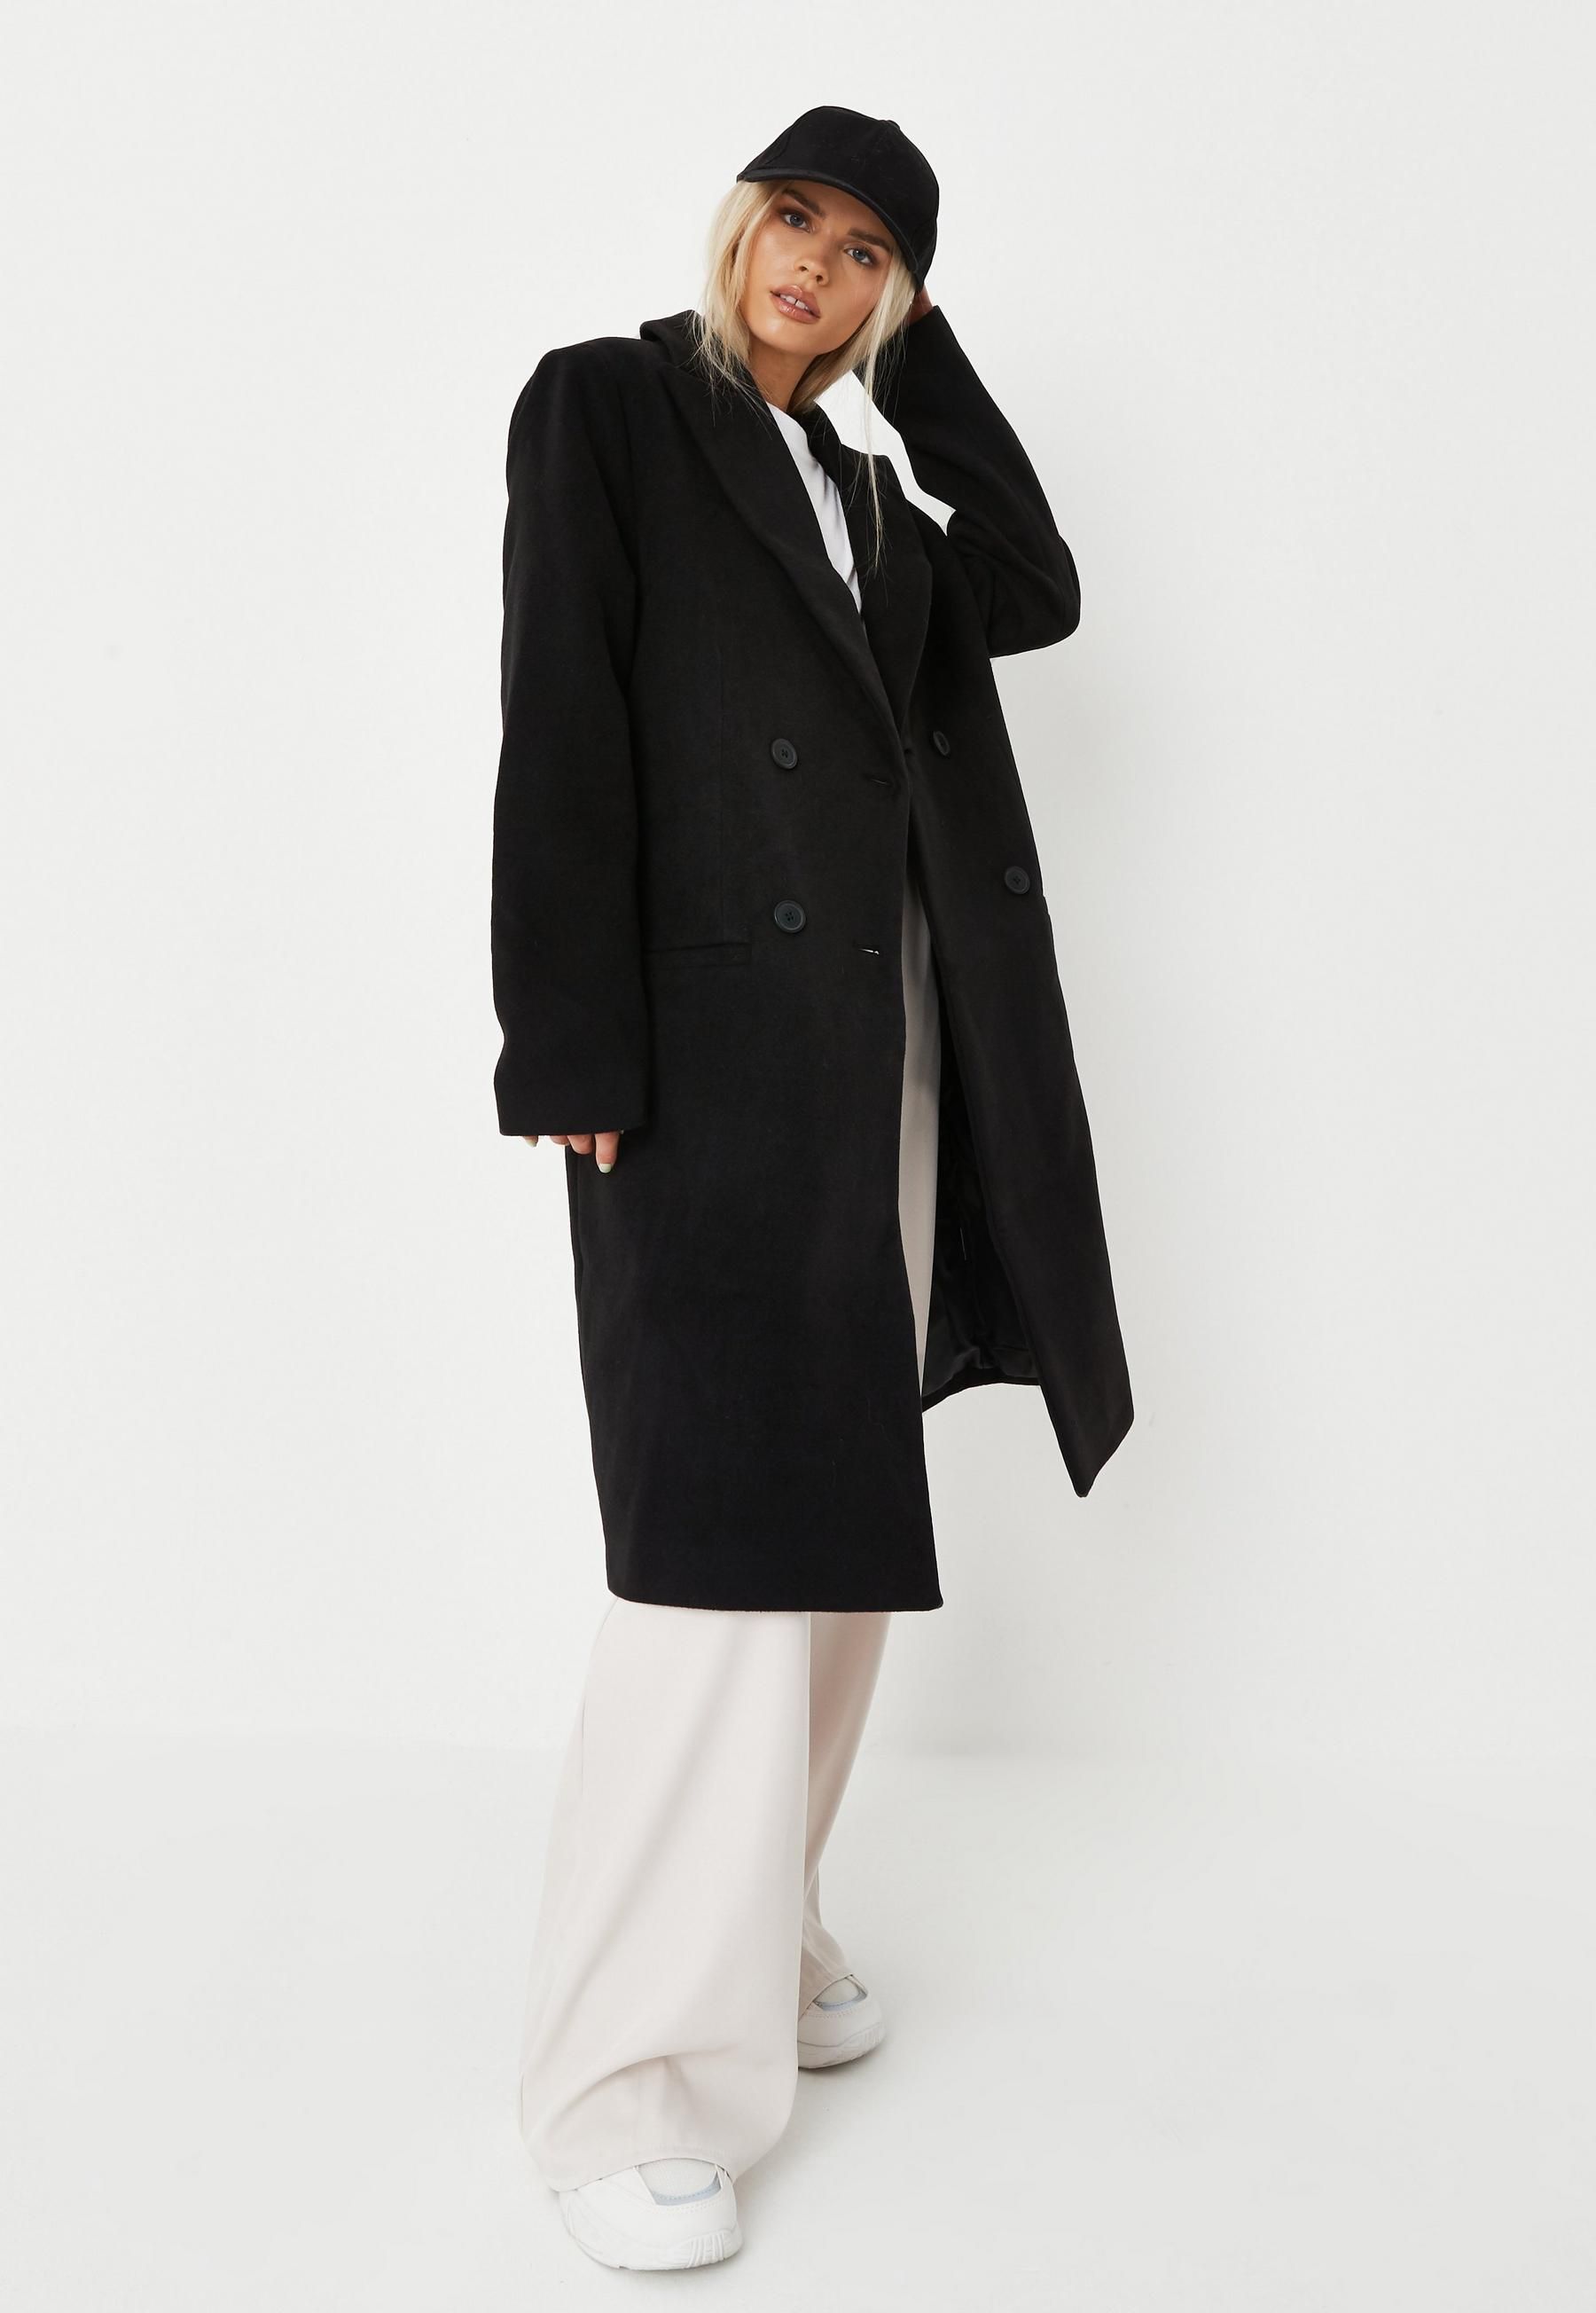 Missguided - Black Slim Double Breasted Longline Formal Coat | Missguided (US & CA)